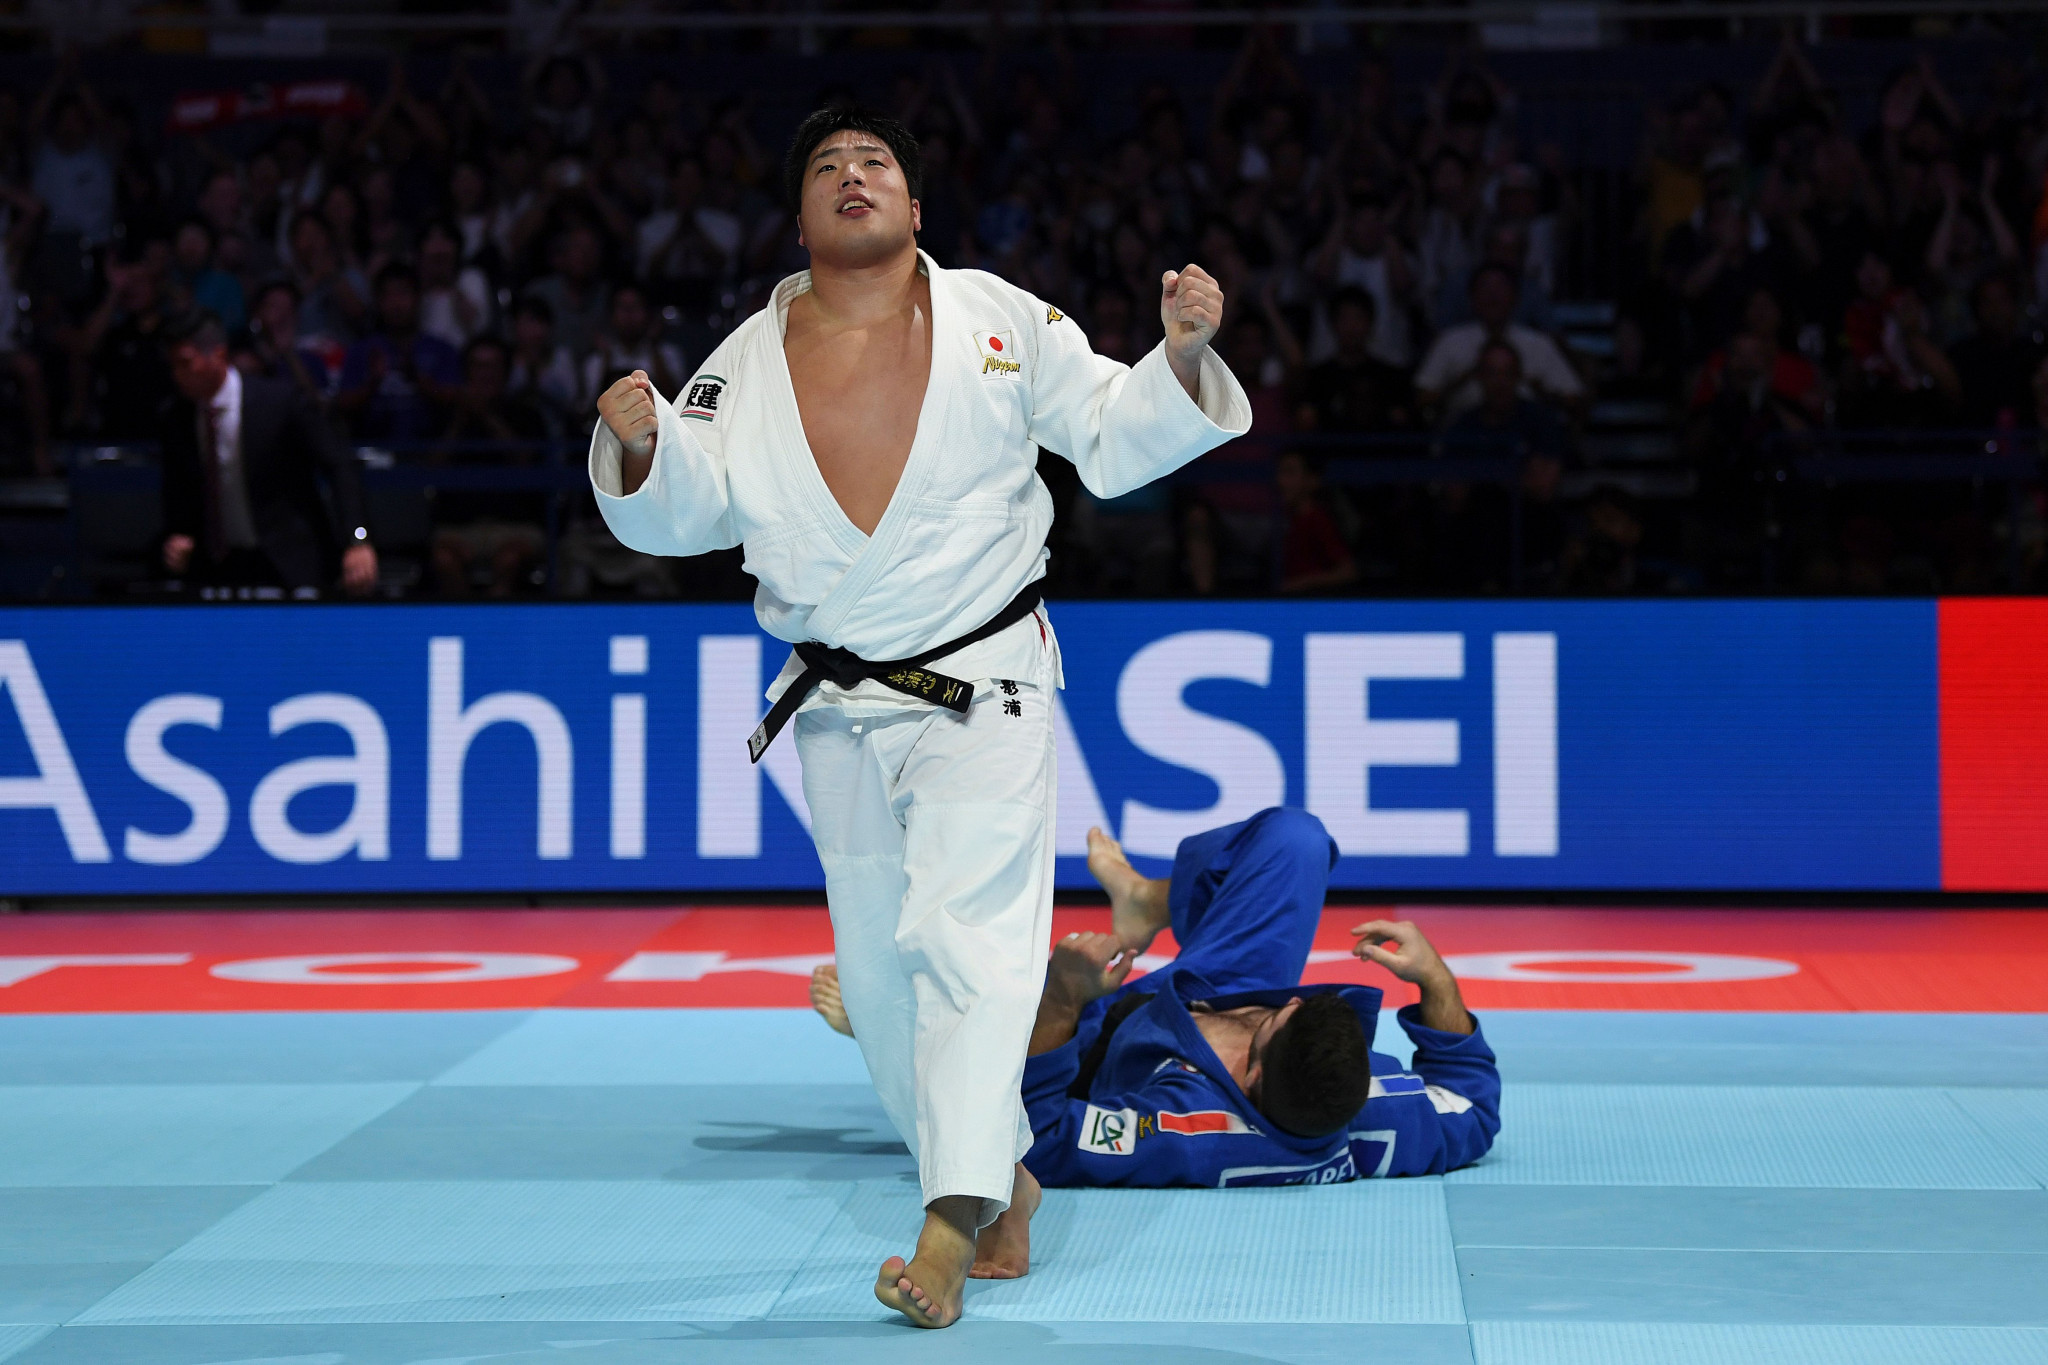 The IJF are offering an all-inclusive trip to the Tokyo 2020 Olympic Games ©Getty Images